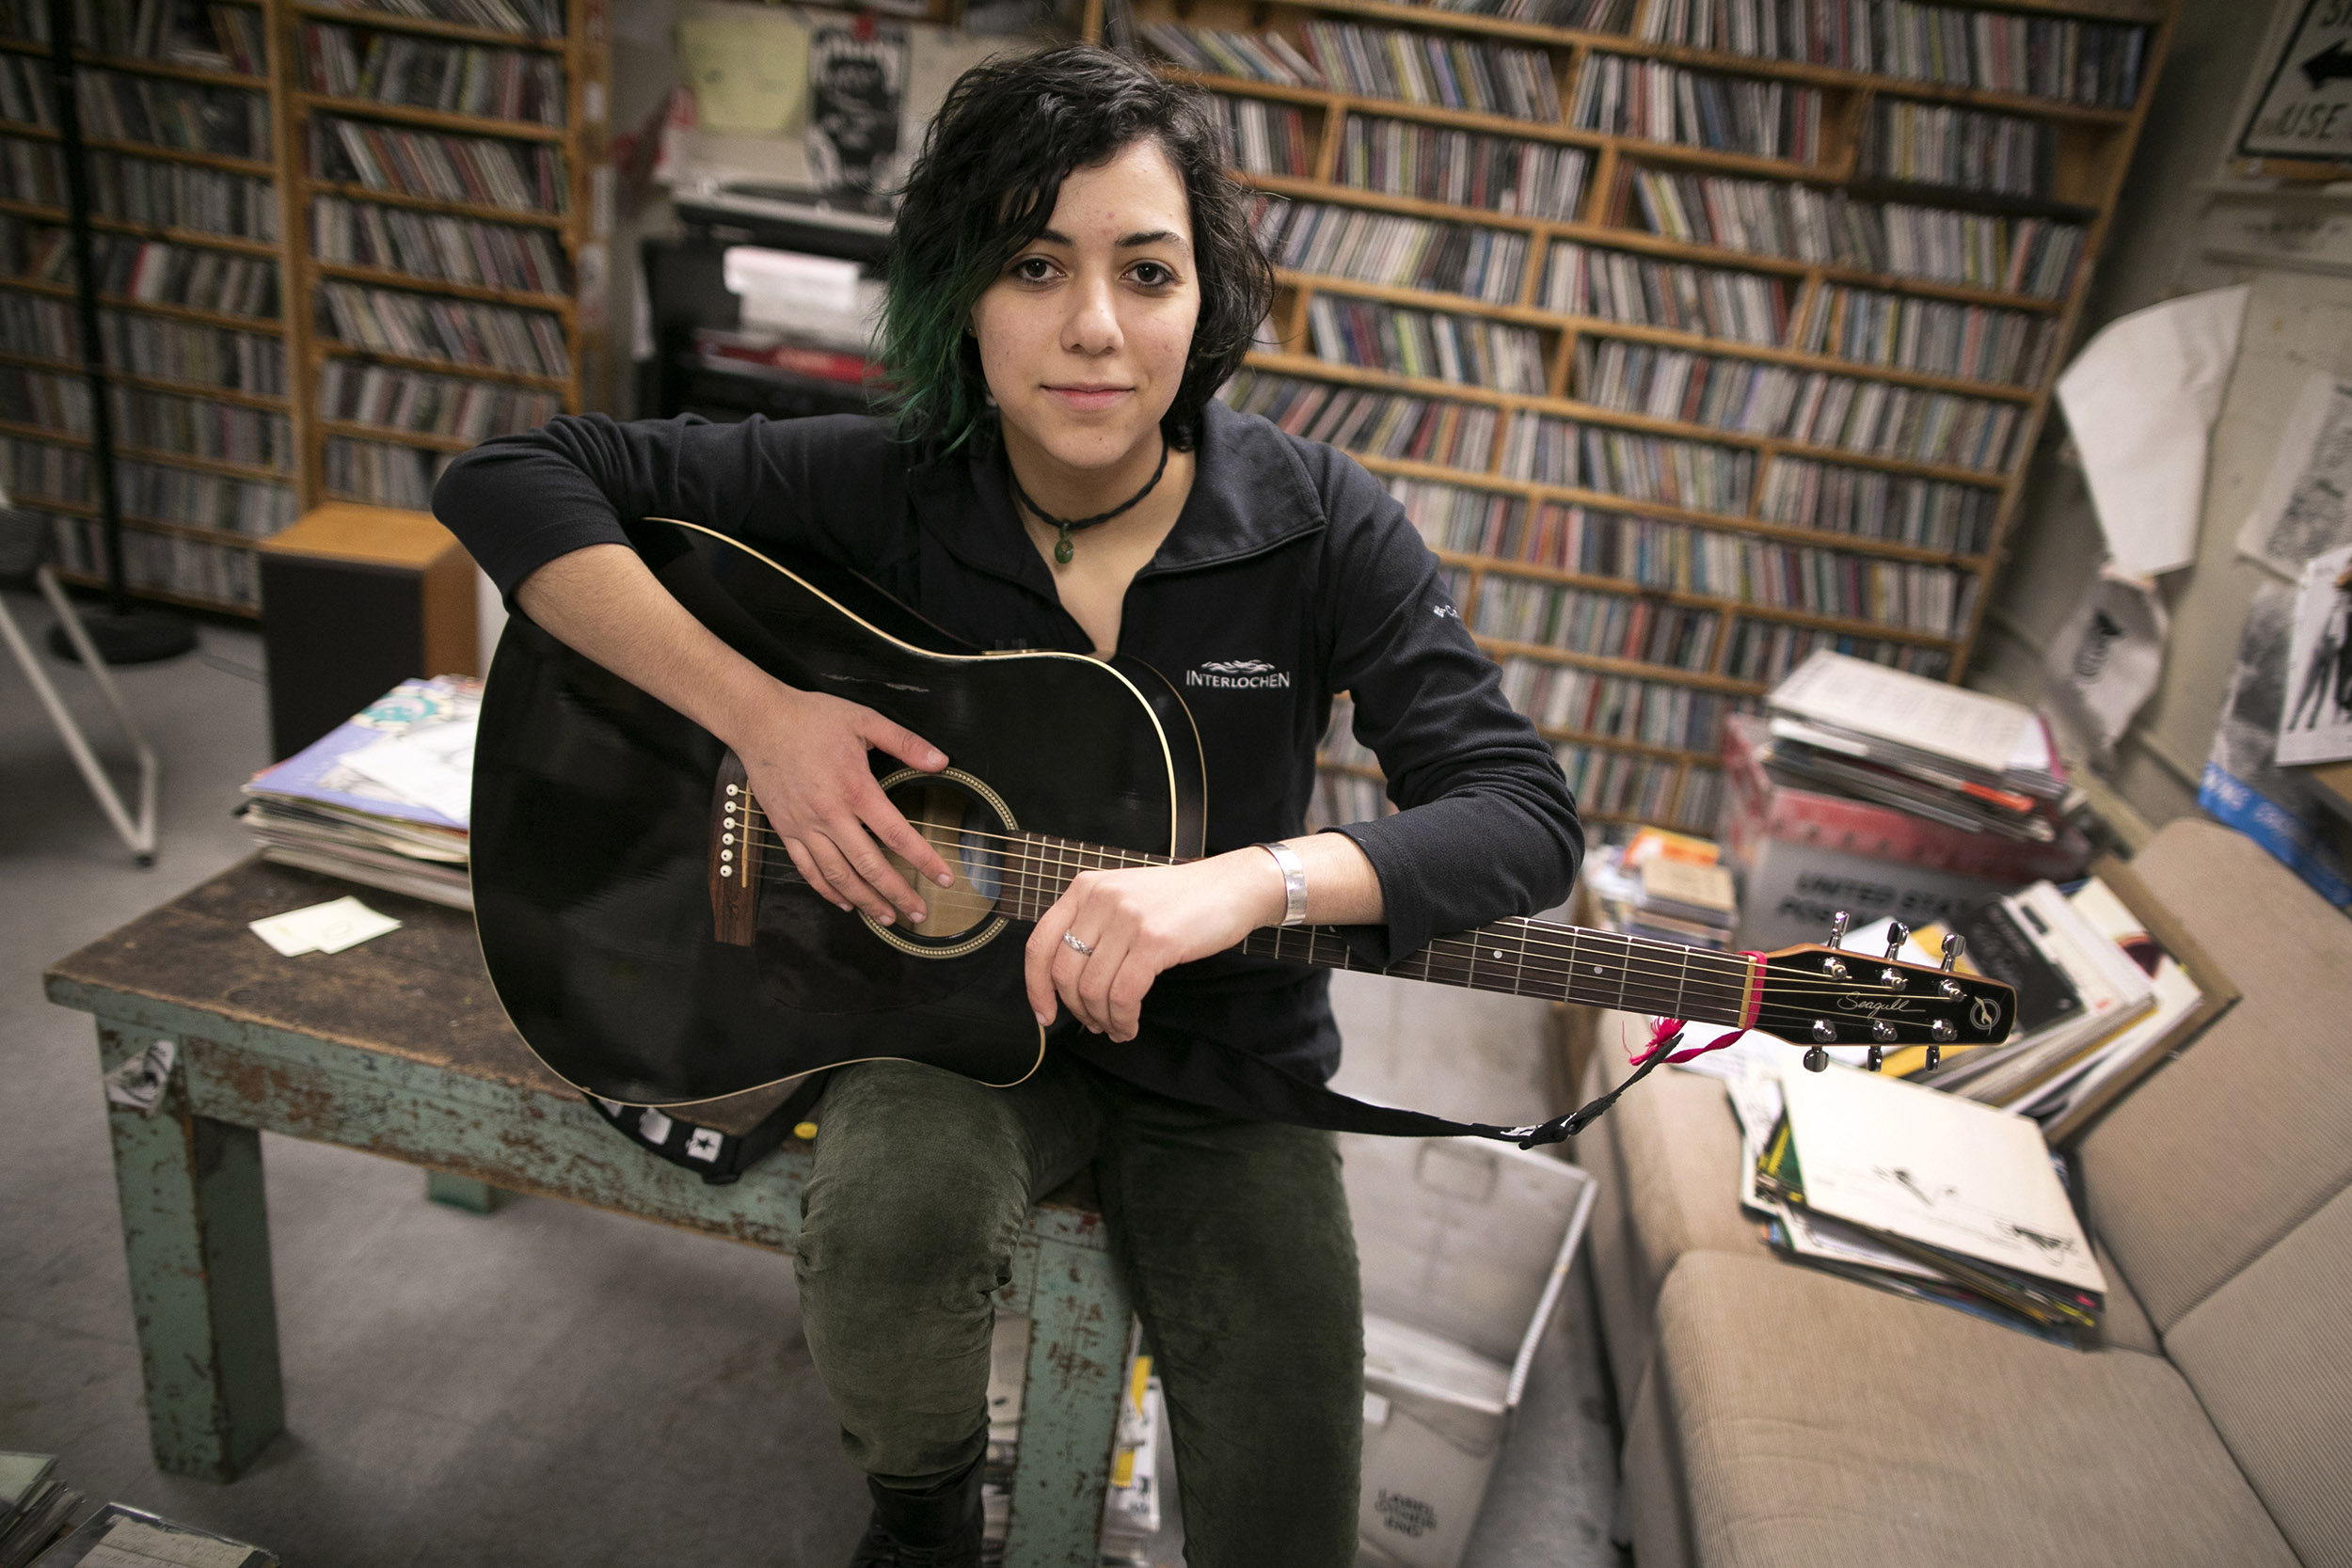 Emily Spector is pictured in the WHRB studio with her guitar.